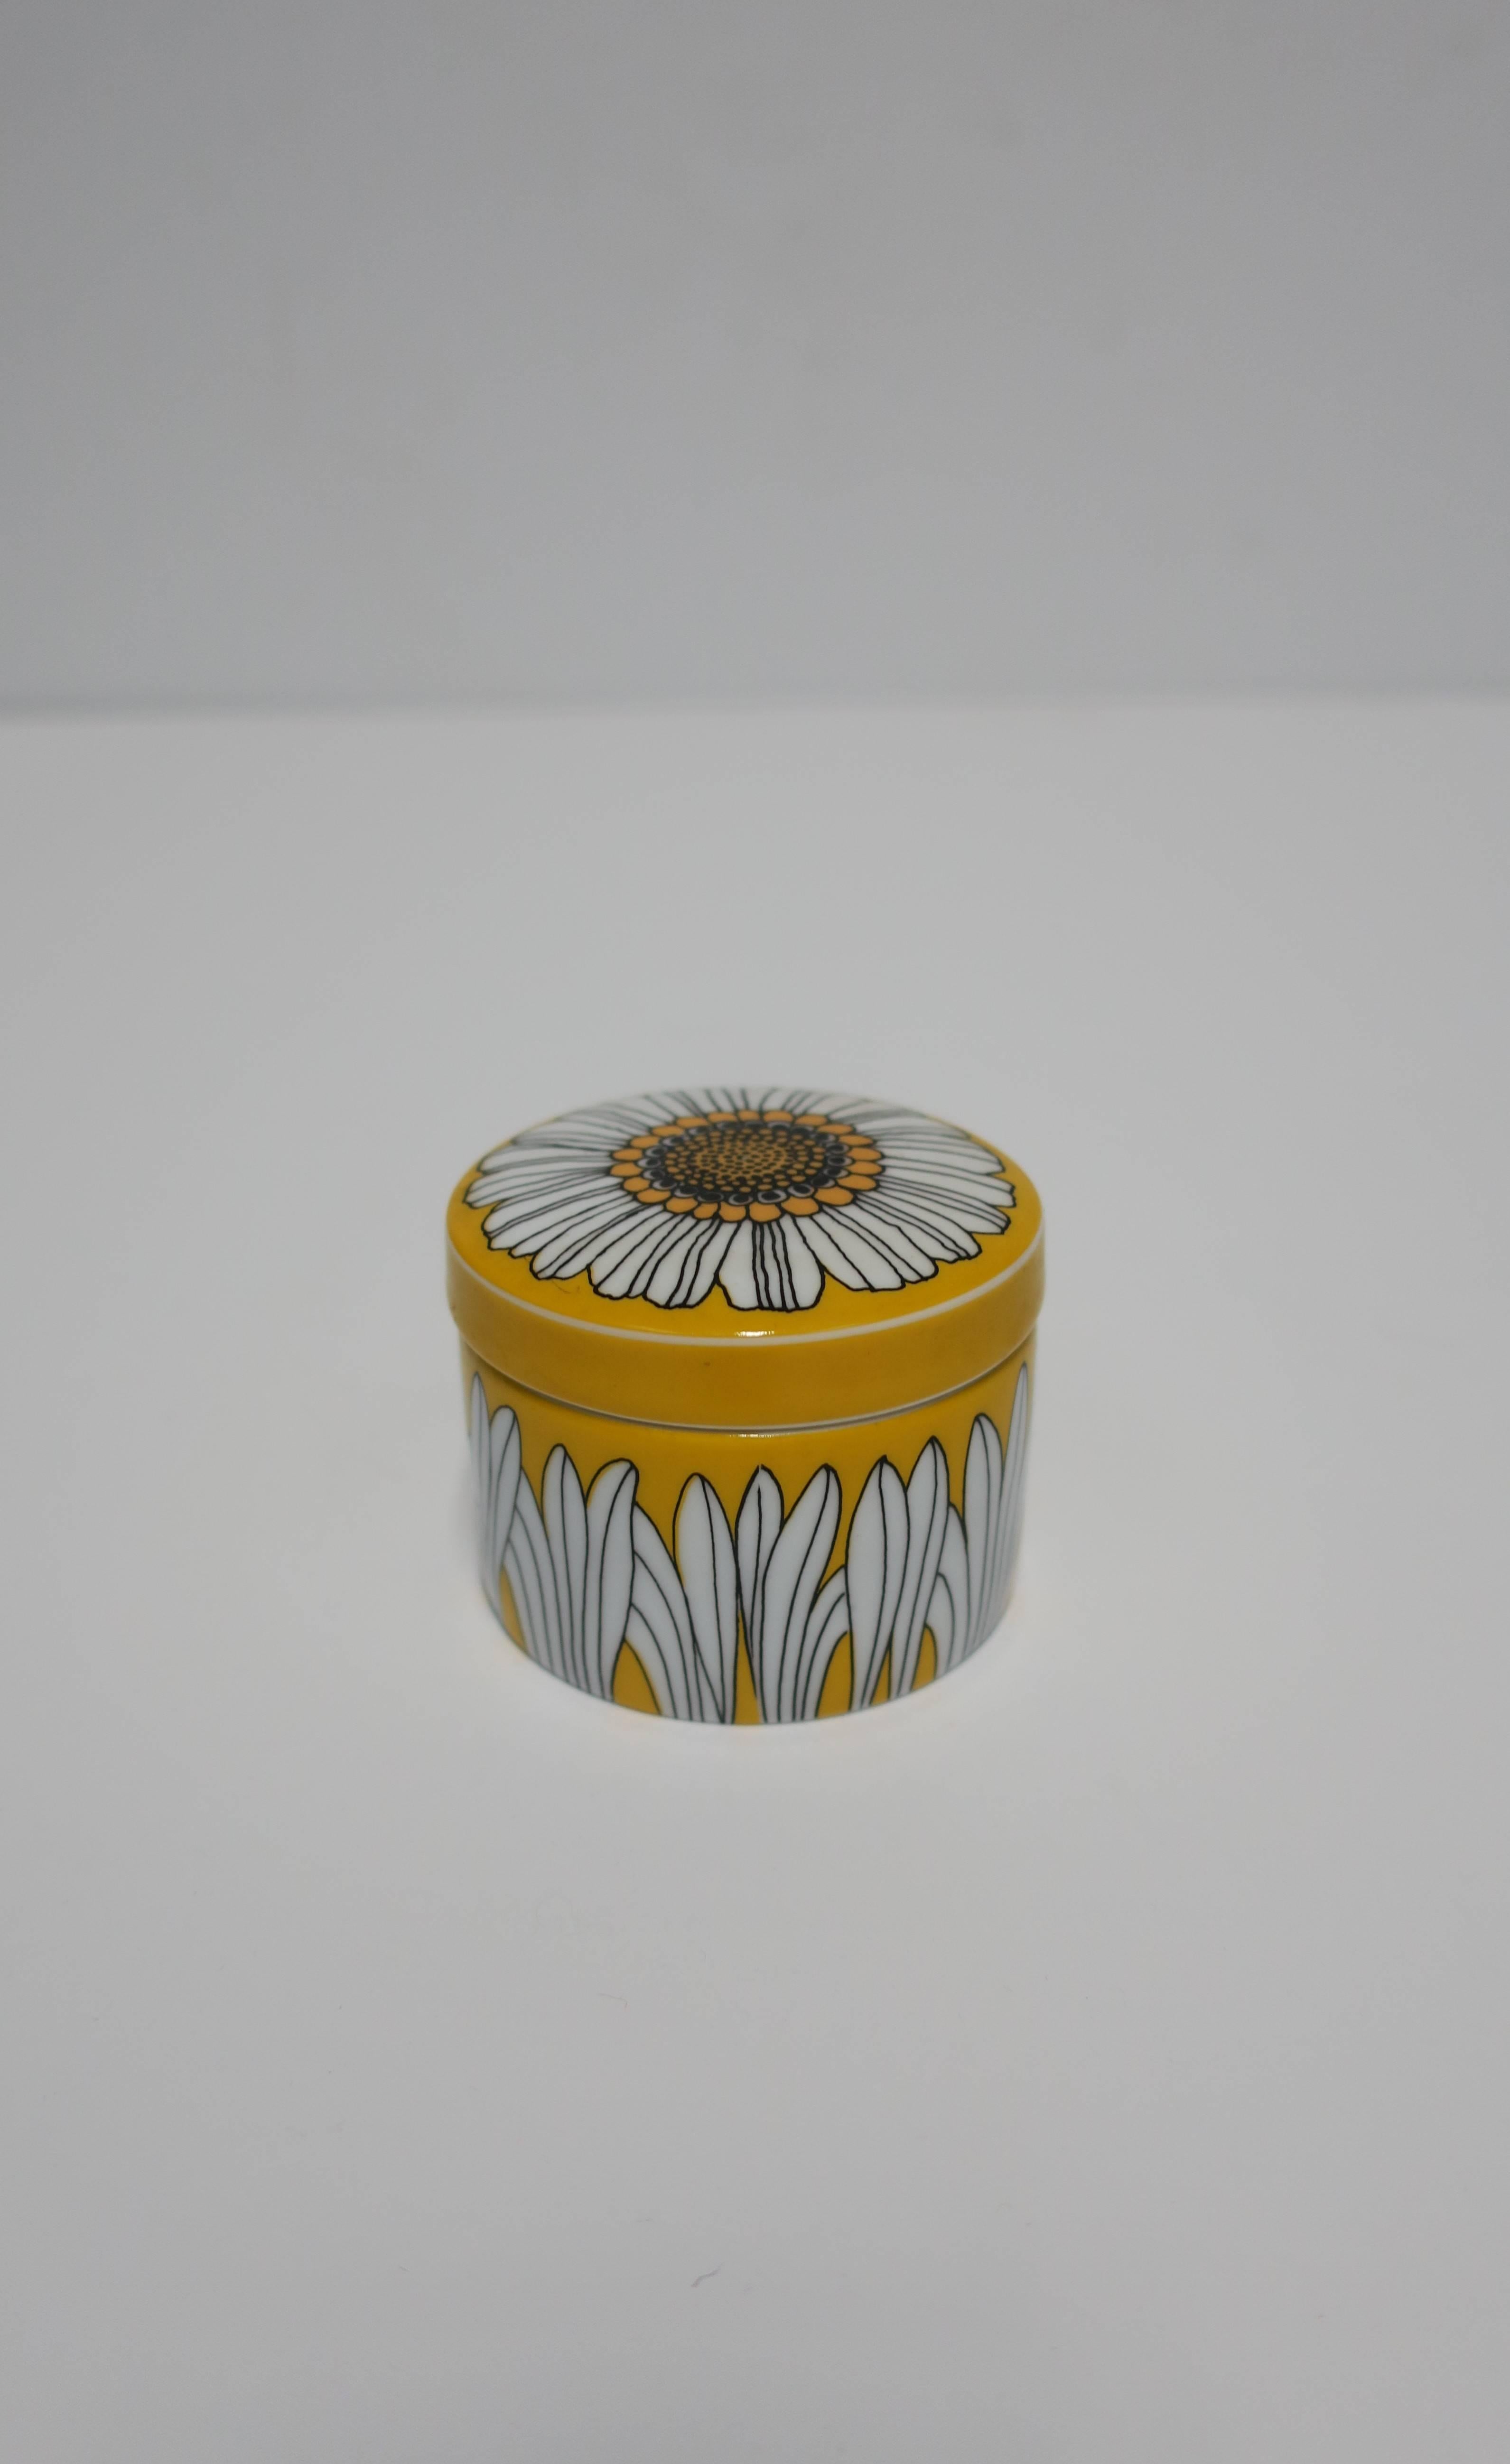 A small and beautiful yellow, black and white round jewelry box by Rosenthal studio-line, Germany. Maker's mark on bottom as show in image #10. Measurements include: 1.75 in. H x 2.25 diameter.